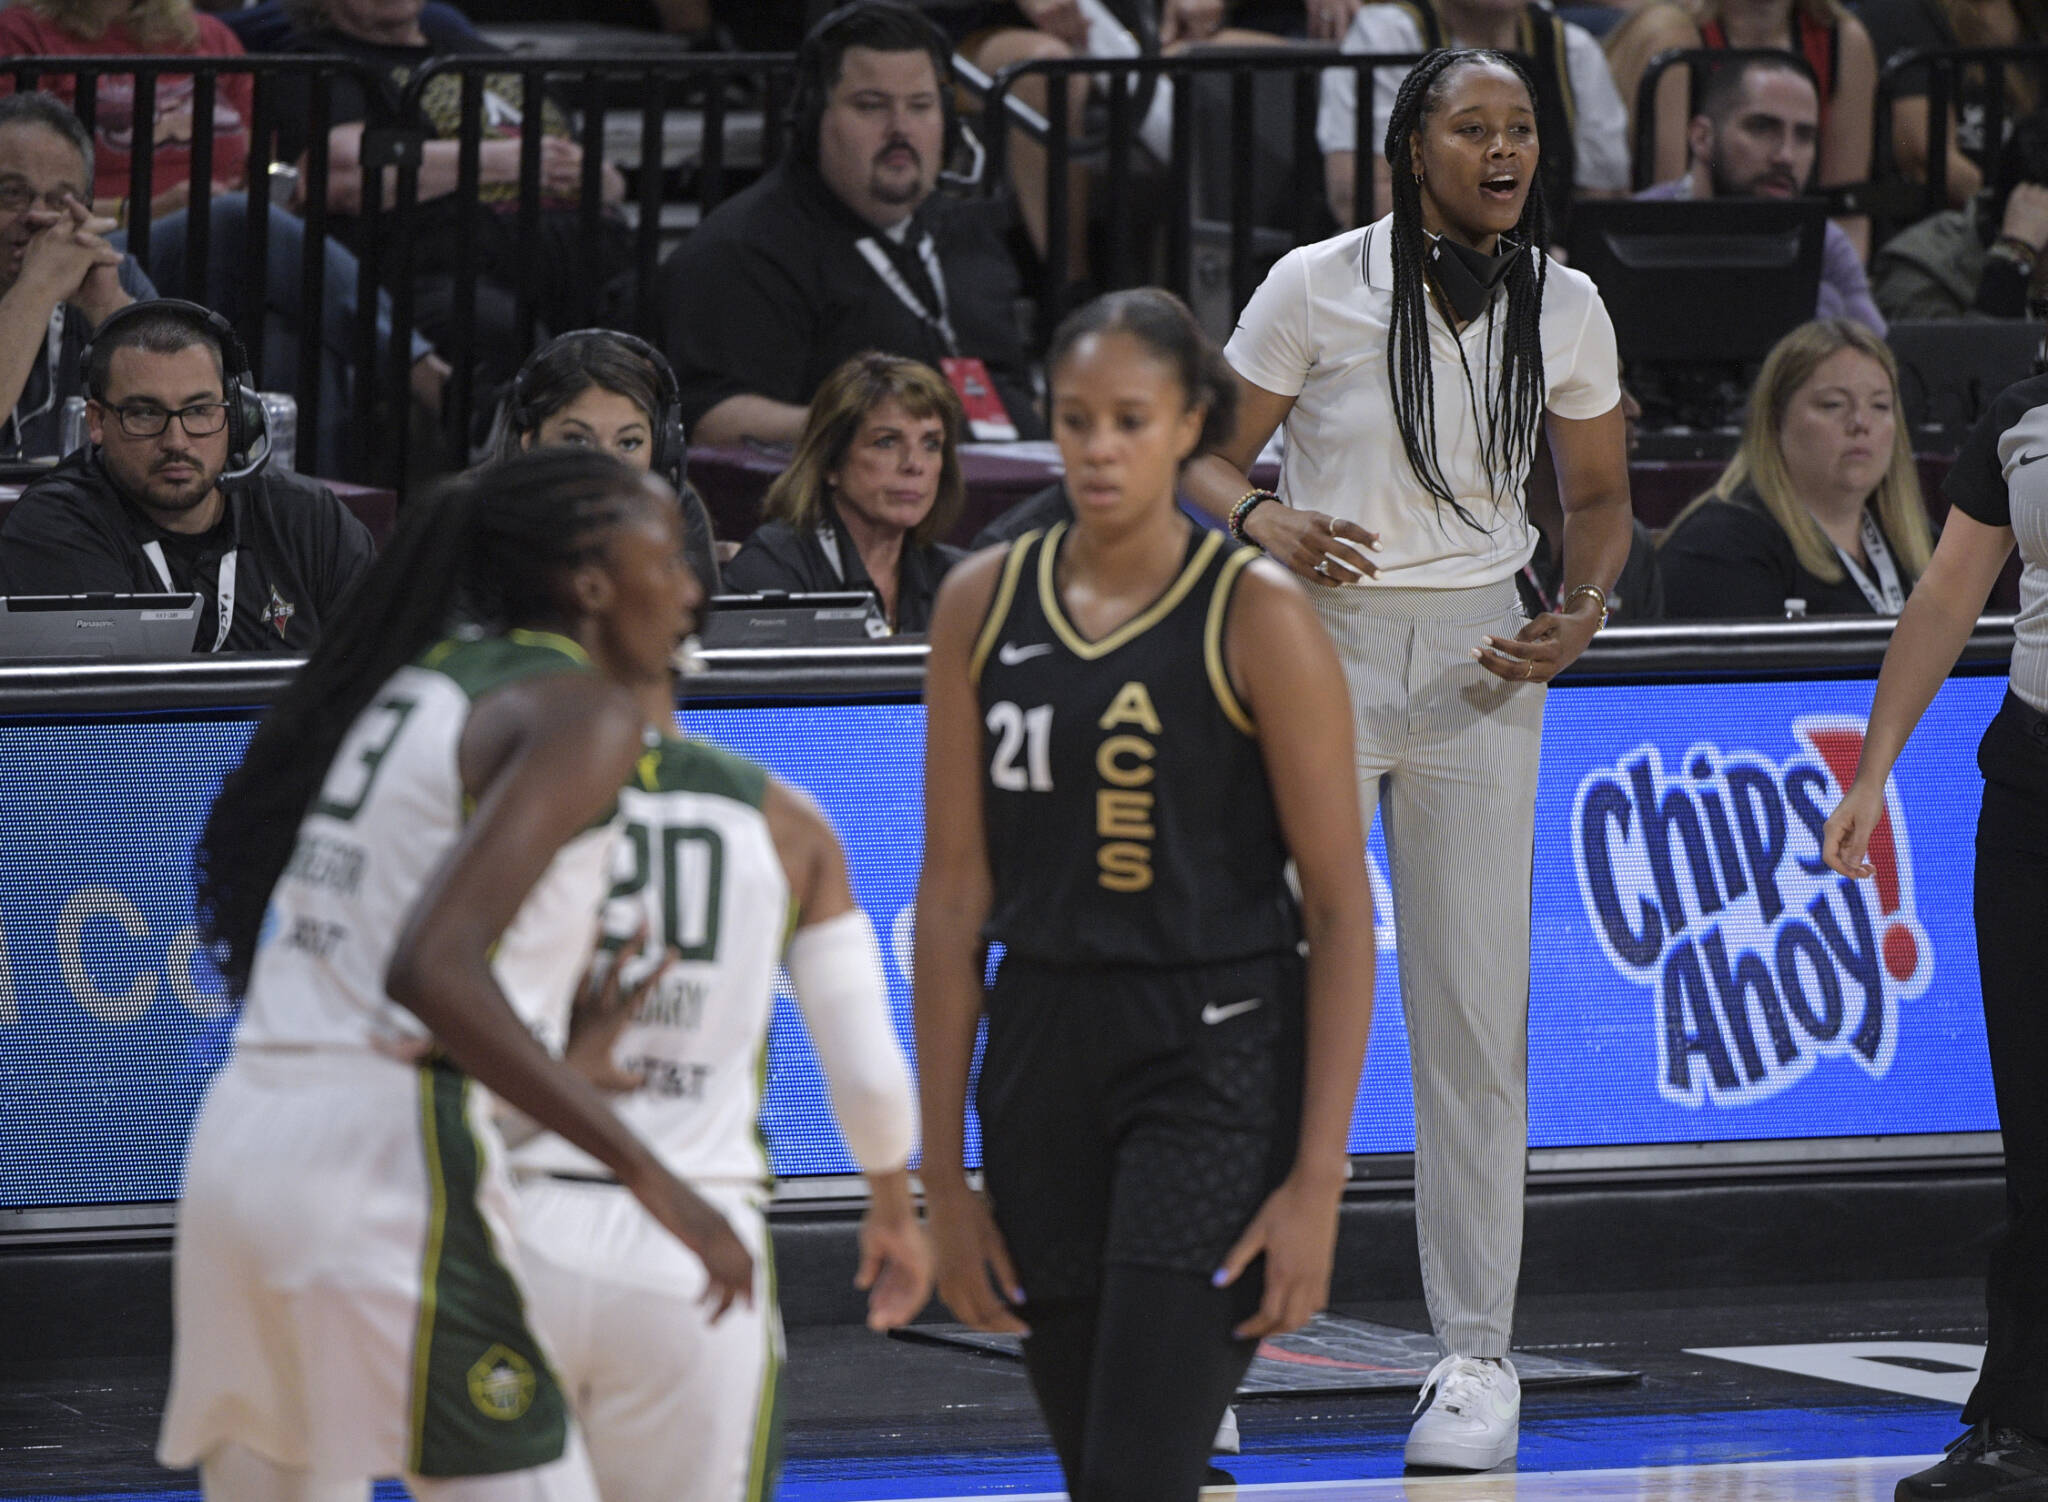 Storm head coach Noelle Quinn directs her team during the first half of a game against the Aces this past Sunday in Las Vegas. (AP Photo/Sam Morris)